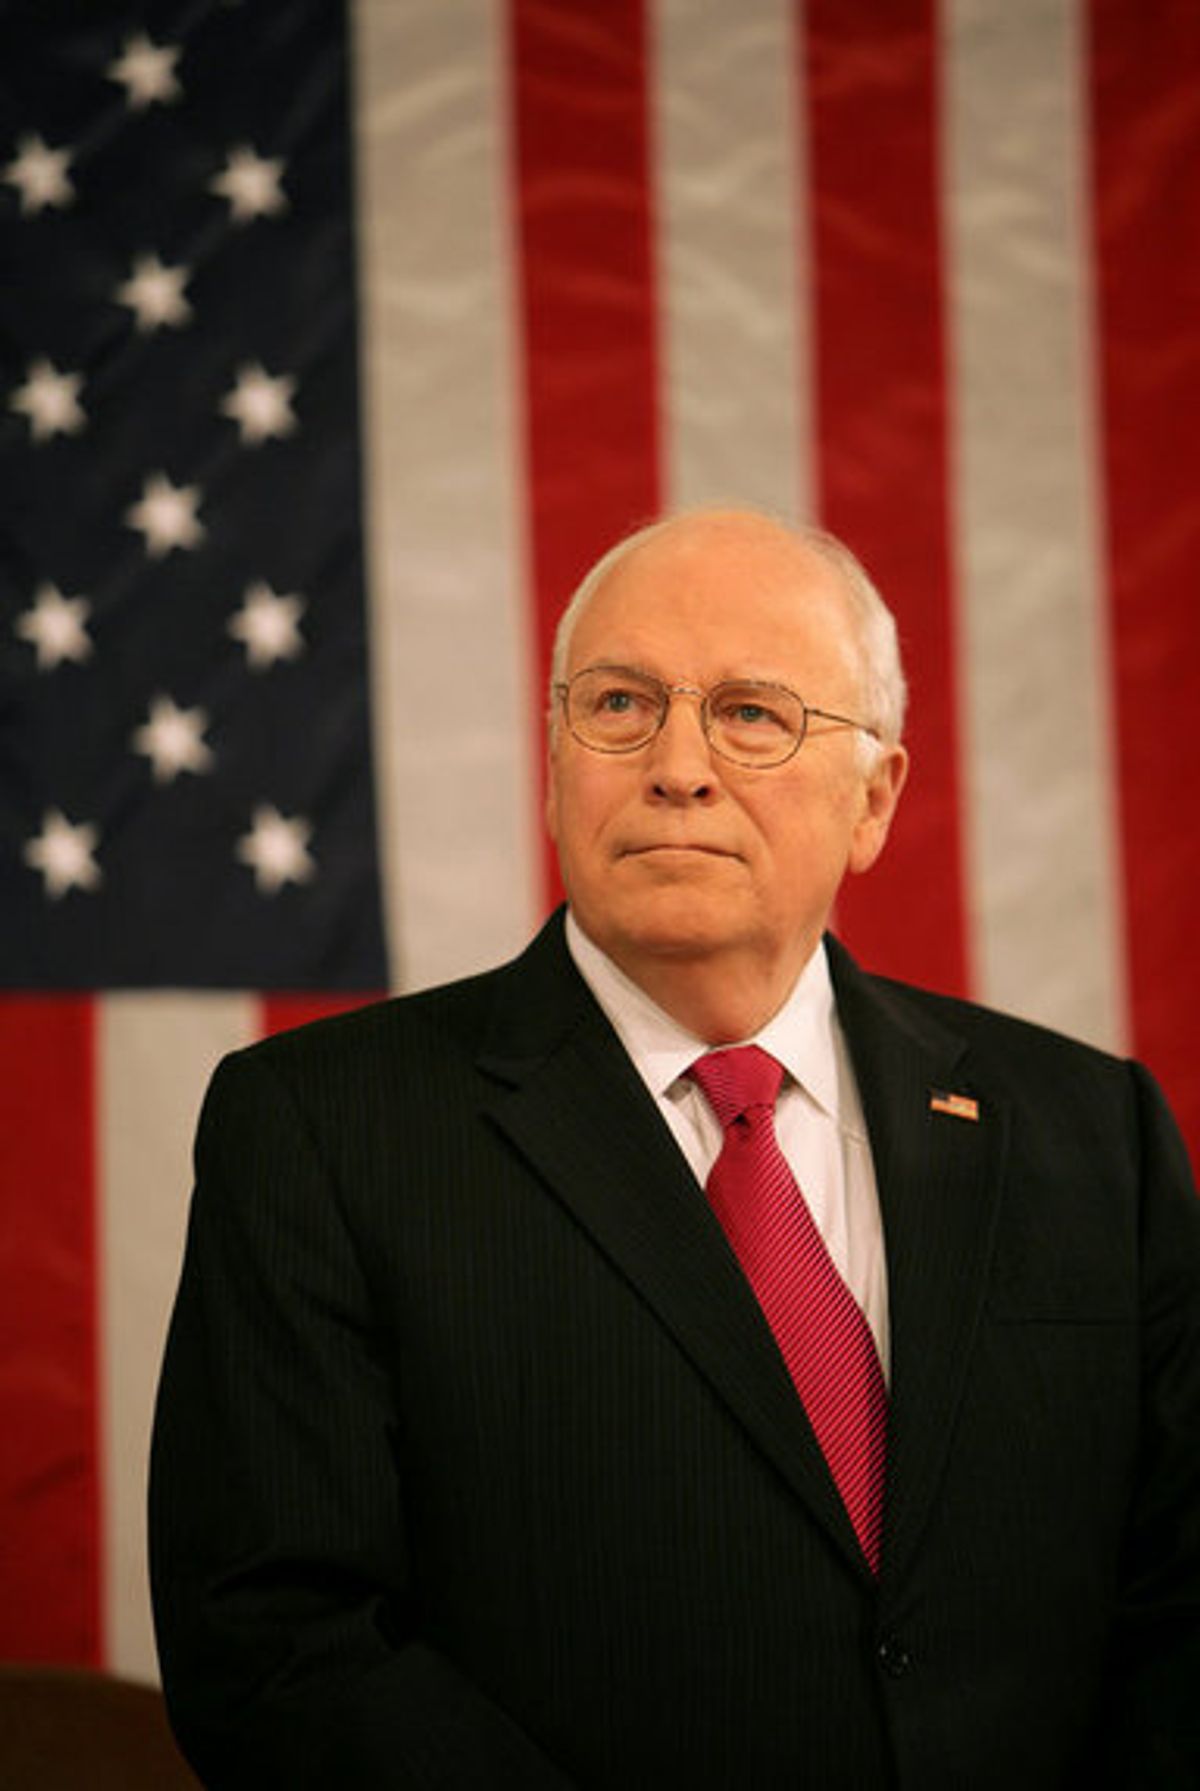 Vice President Dick Cheney is seen Jan. 28, 2008 during the State of the Union Address at the U.S. Capitol.  With a distinguished career in public service spanning four decades, the Vice President has served four presidents and his home state of Wyoming as a six-term member of the U.S. House of Representatives.  White House photo by David Bohrer  (David Bohrer)